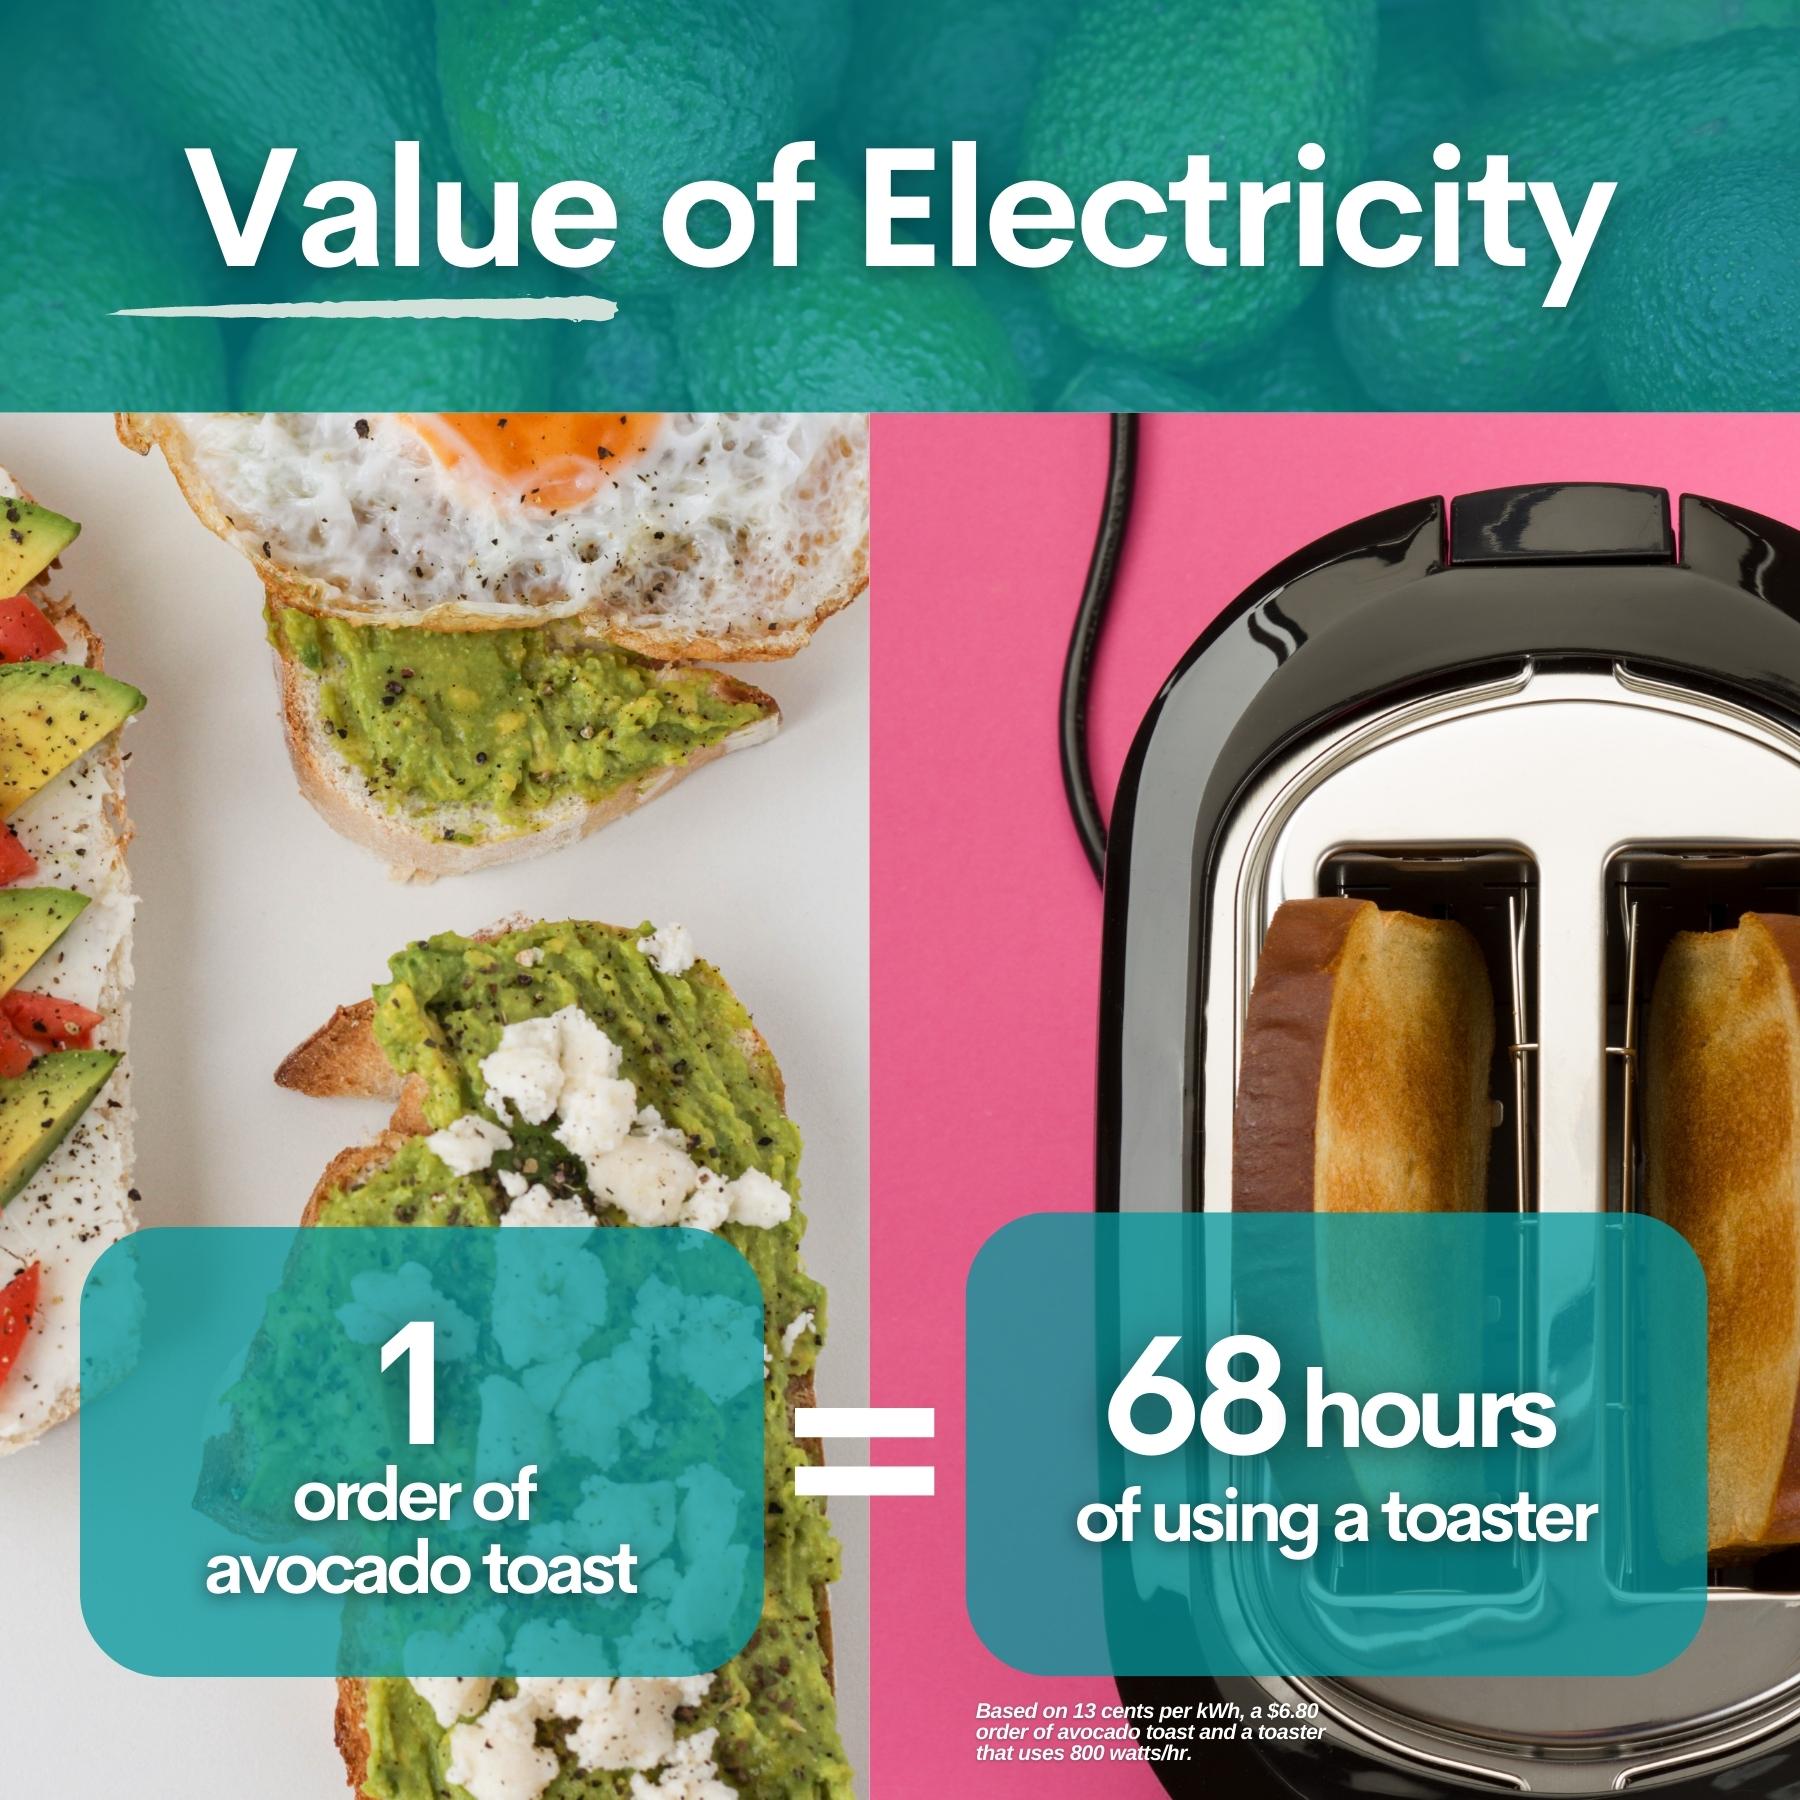 Photo showing one order of avocado toast at a restaurant is equal tot he electricity cost of 68 hours of operating a toaster at home.